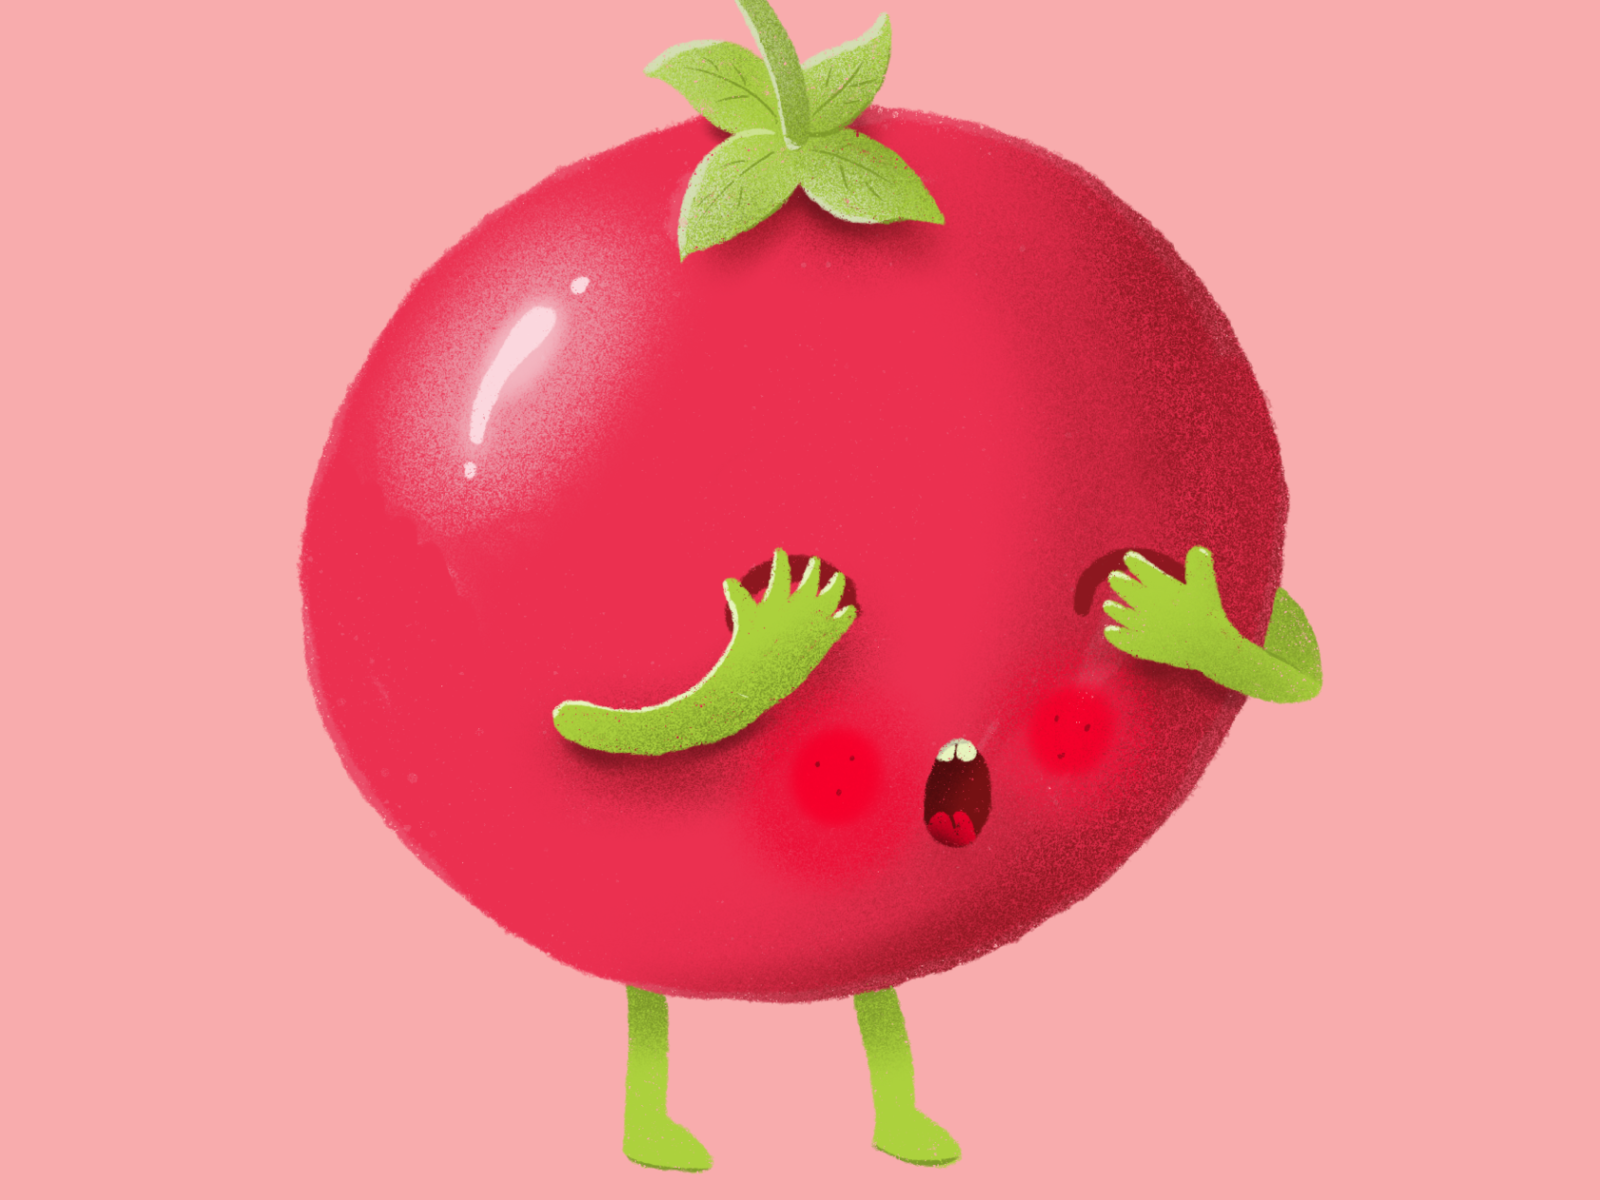 Why was the tomato blushing